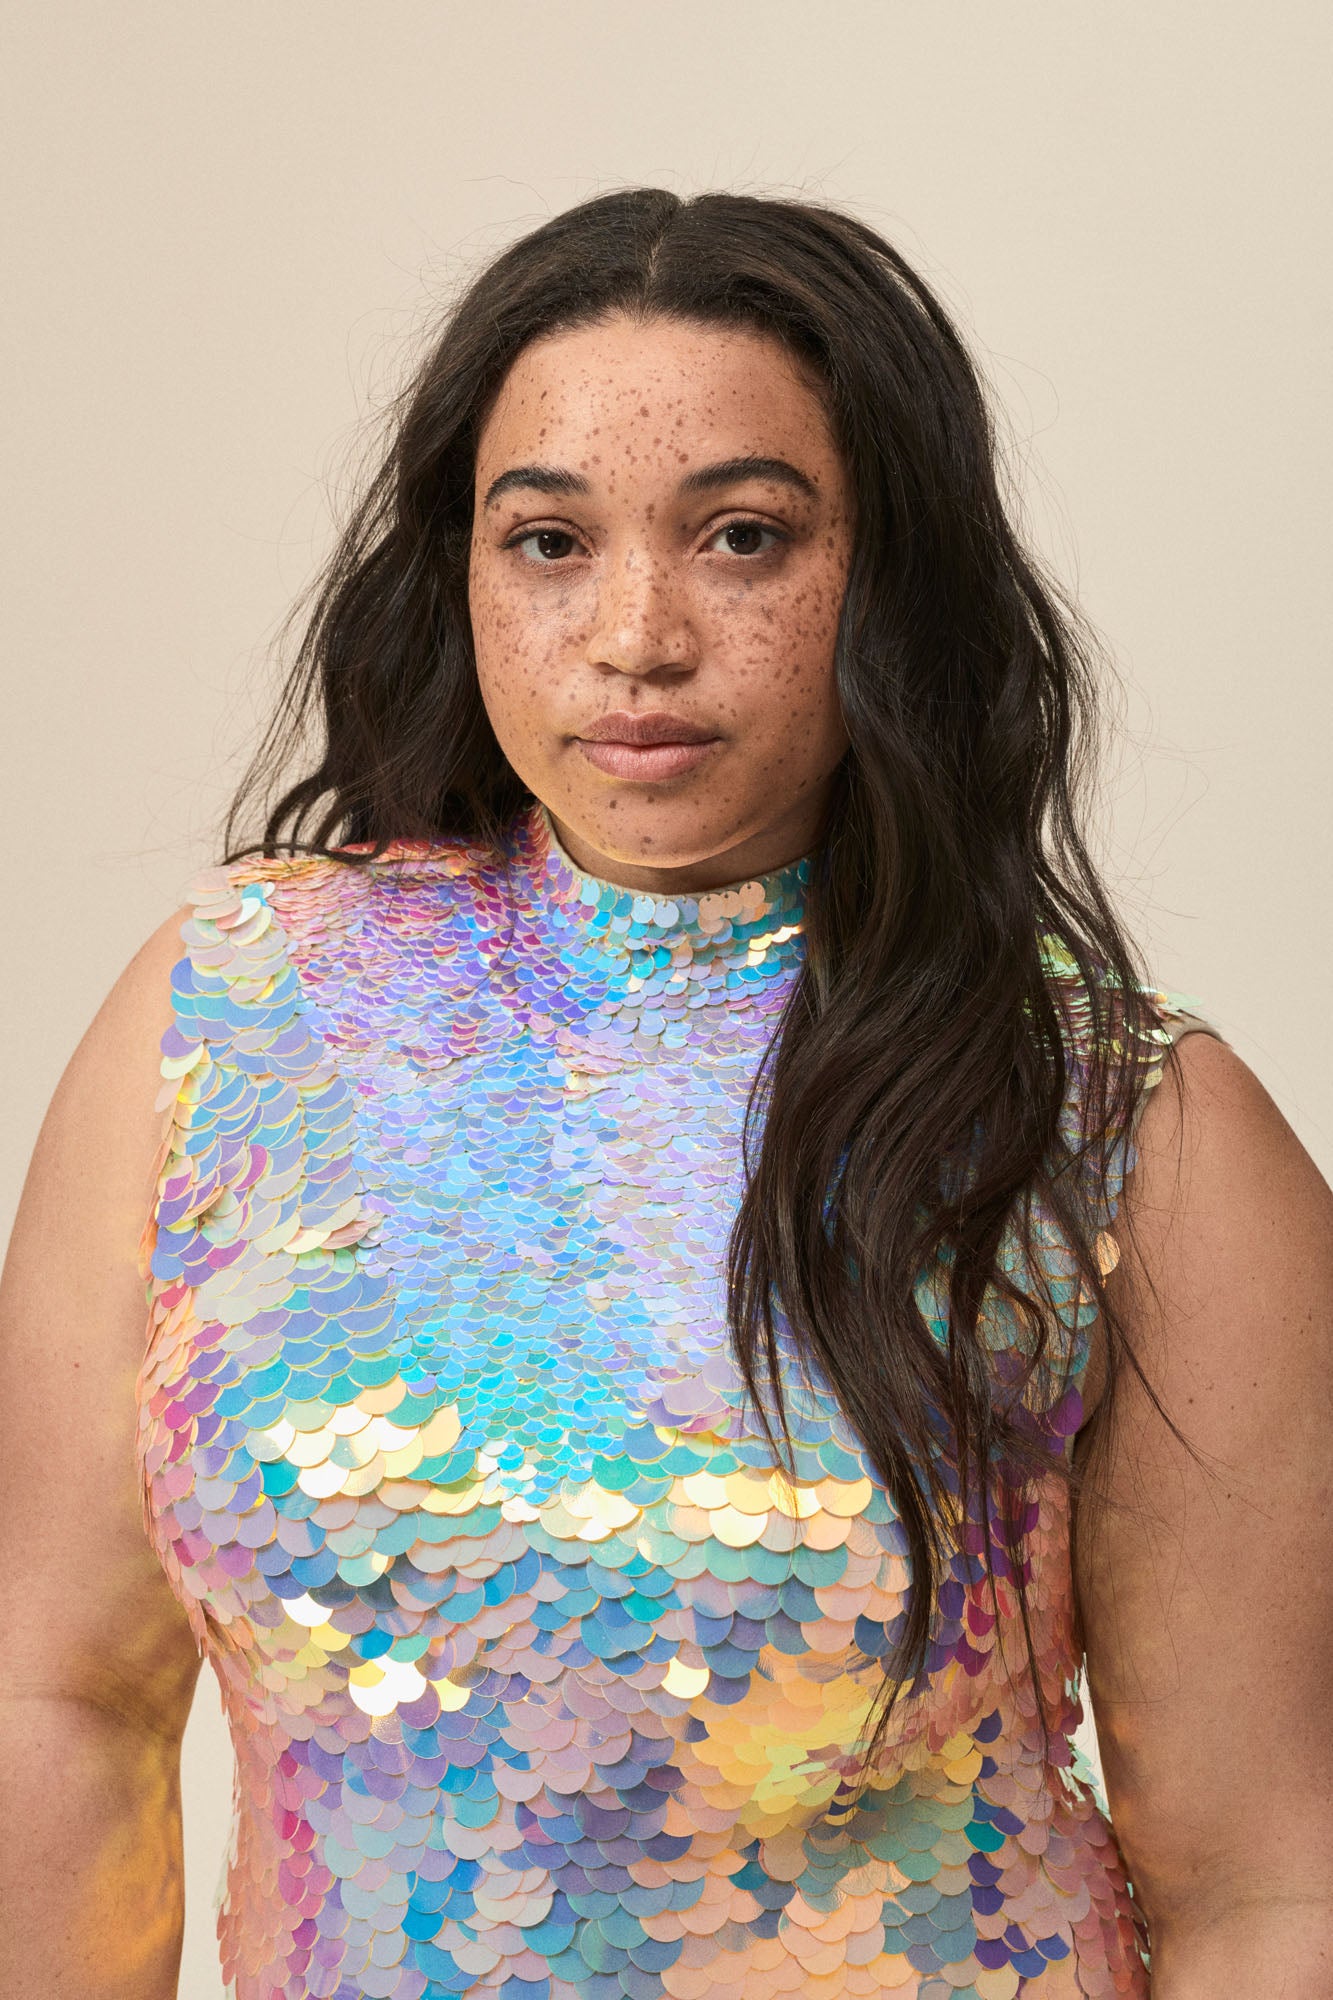  A portrait of a woman wearing a dazzling off-white sequin jumpsuit with a high neck collar.